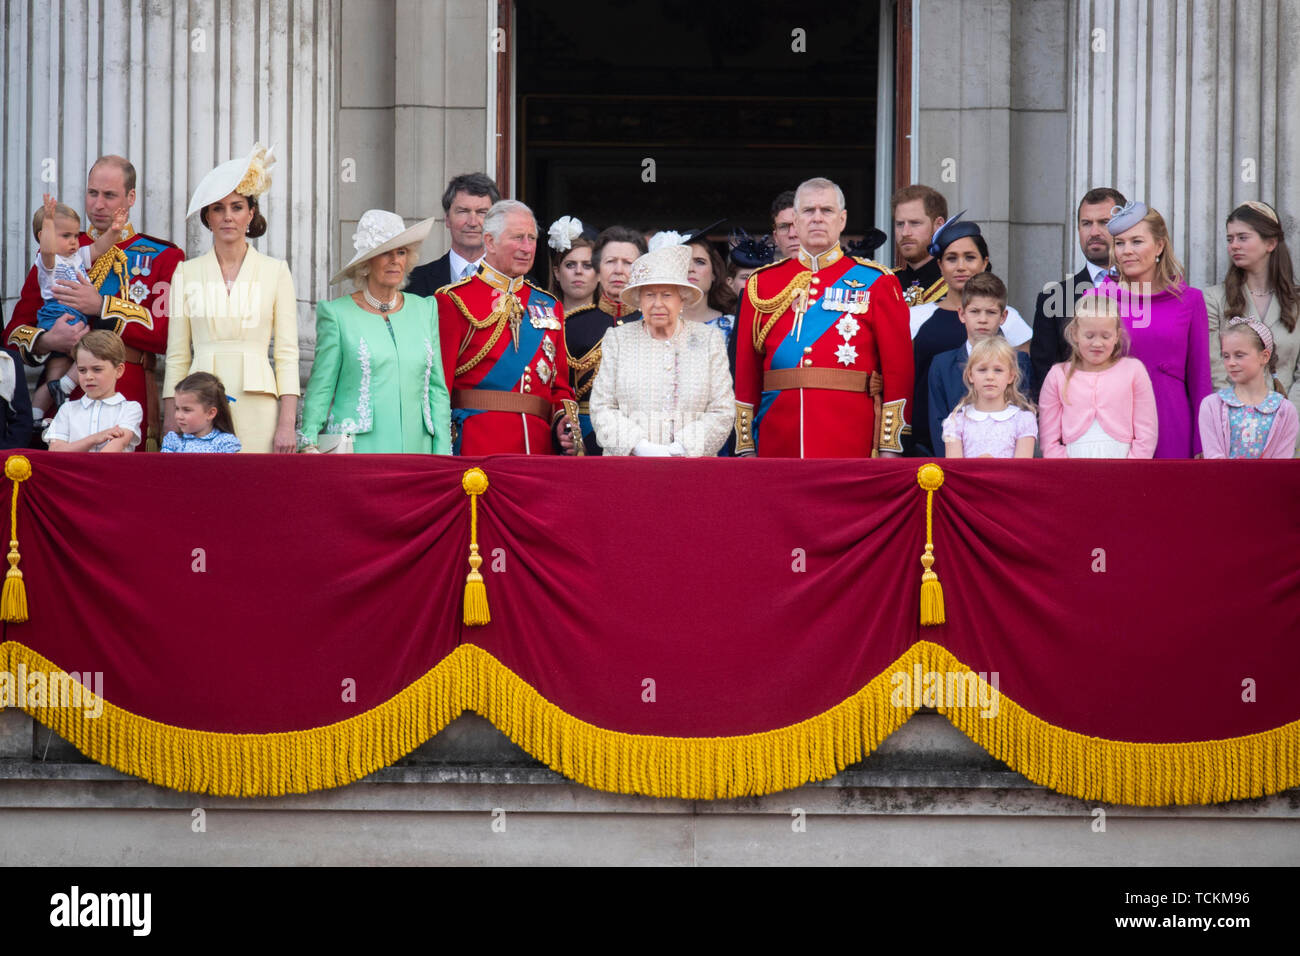 Queen Elizabeth II is joined by members of the royal family on the balcony of Buckingham Place to acknowledge the crowd after the Trooping the Colour ceremony, as she celebrates her official birthday. Stock Photo